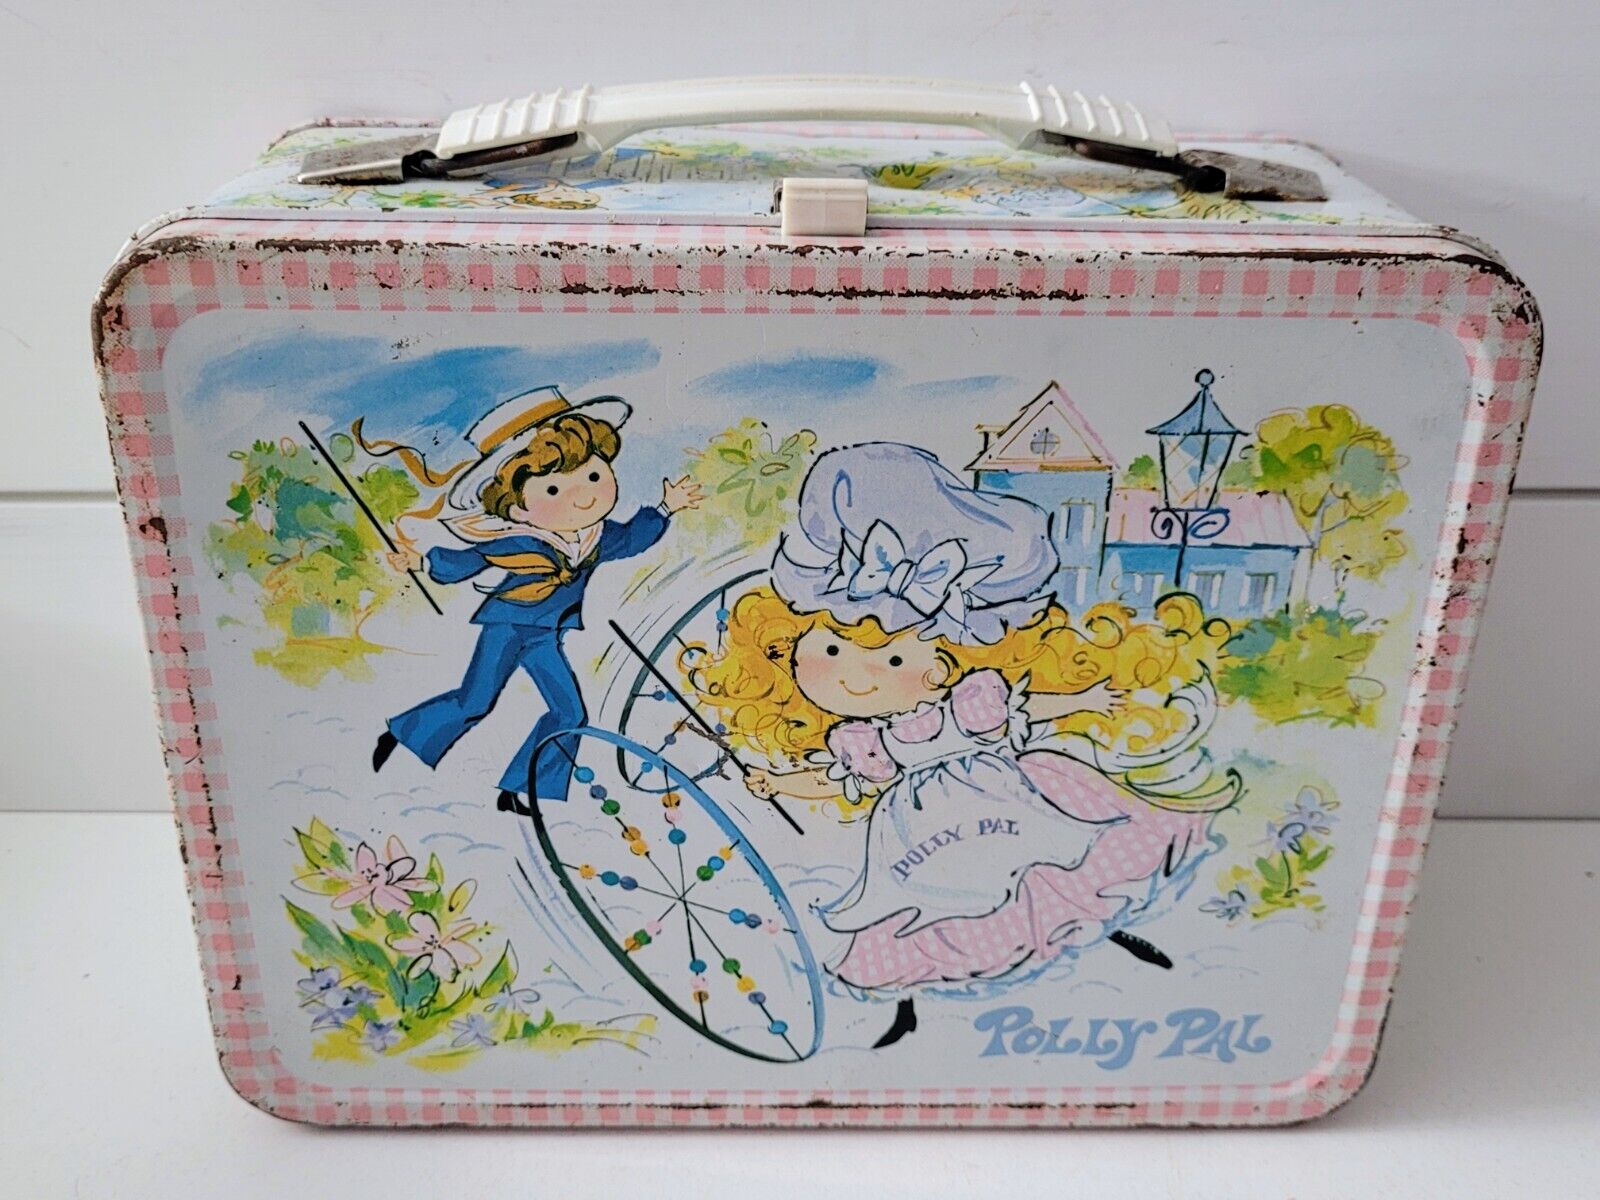 Vintage 1974 Polly Pal Metal Lunch Box no Thermos Lunchbox 